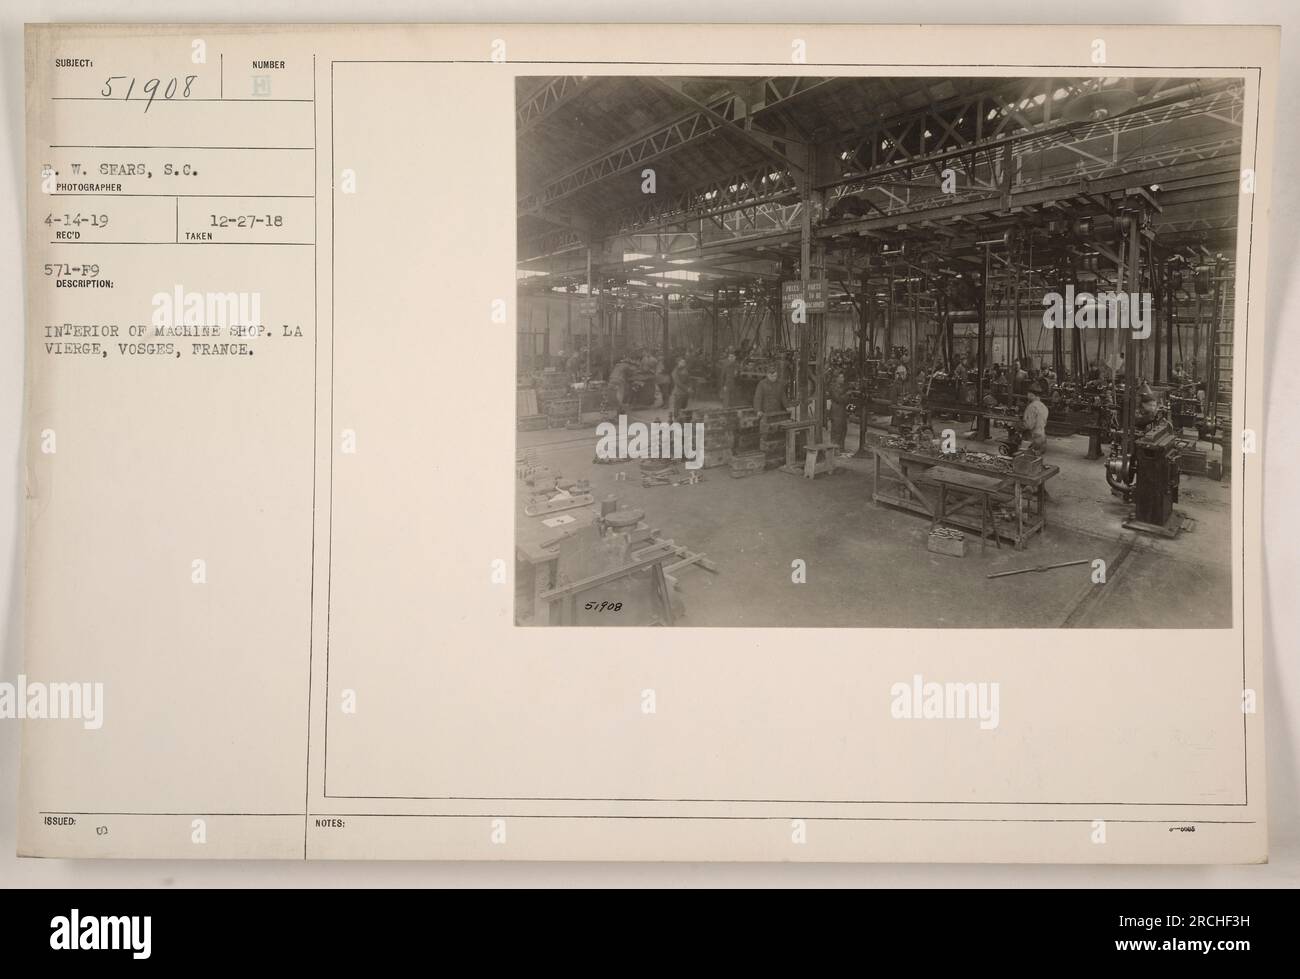 Interior of a machine shop at La Vierge, Vosges, France, photographed on April 14, 1919. The photograph, taken by R.W. Sears, shows machinery and workstations in the shop. This image is part of the collection 'Photographs of American Military Activities during World War One.' Stock Photo